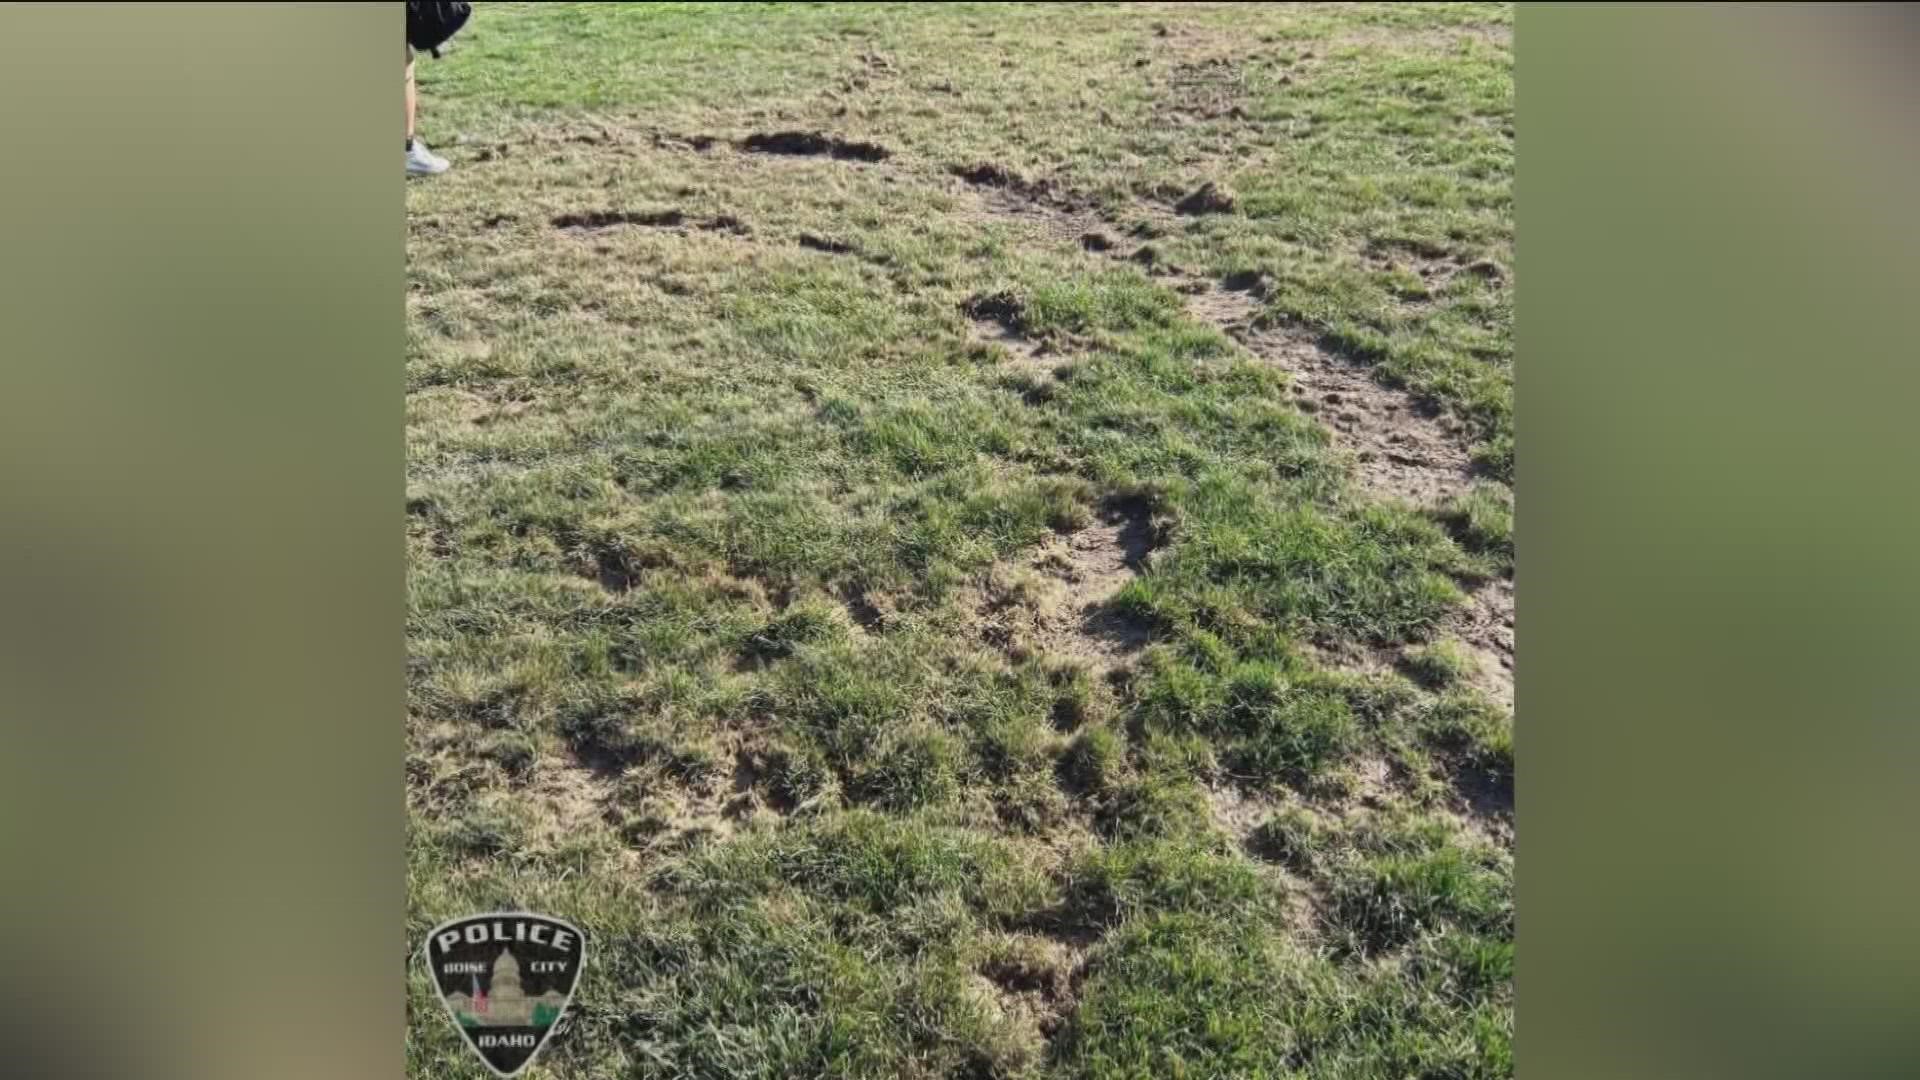 Two men were arrested in connection to the vandalized fields at Capital High School Thursday, according to a press release from the Boise Police Department (BPD).